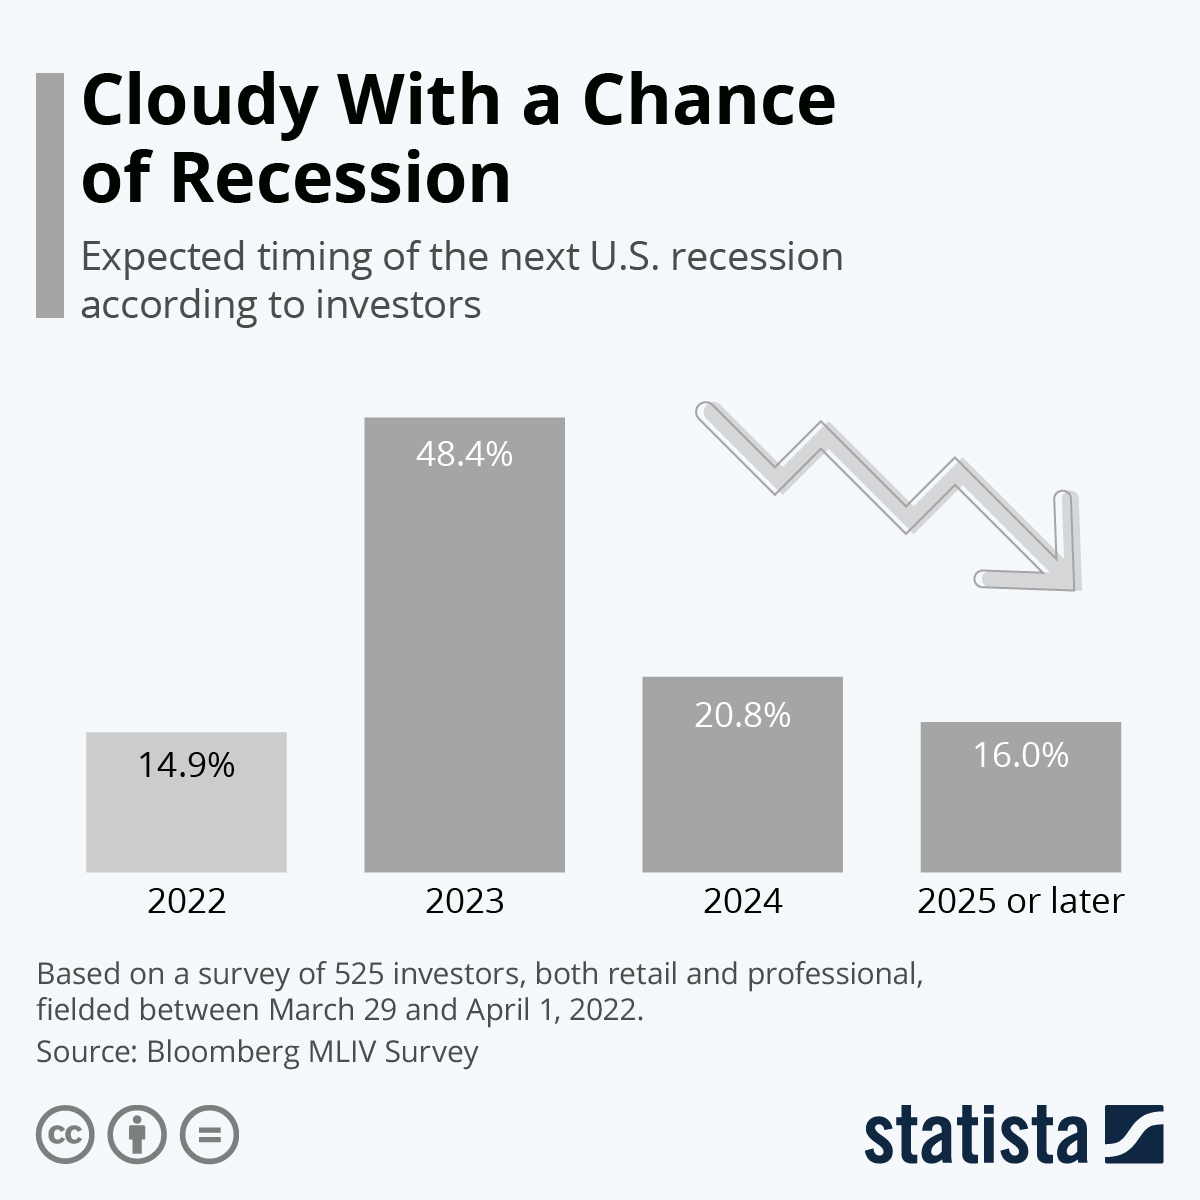 Cloud with a chance of recession